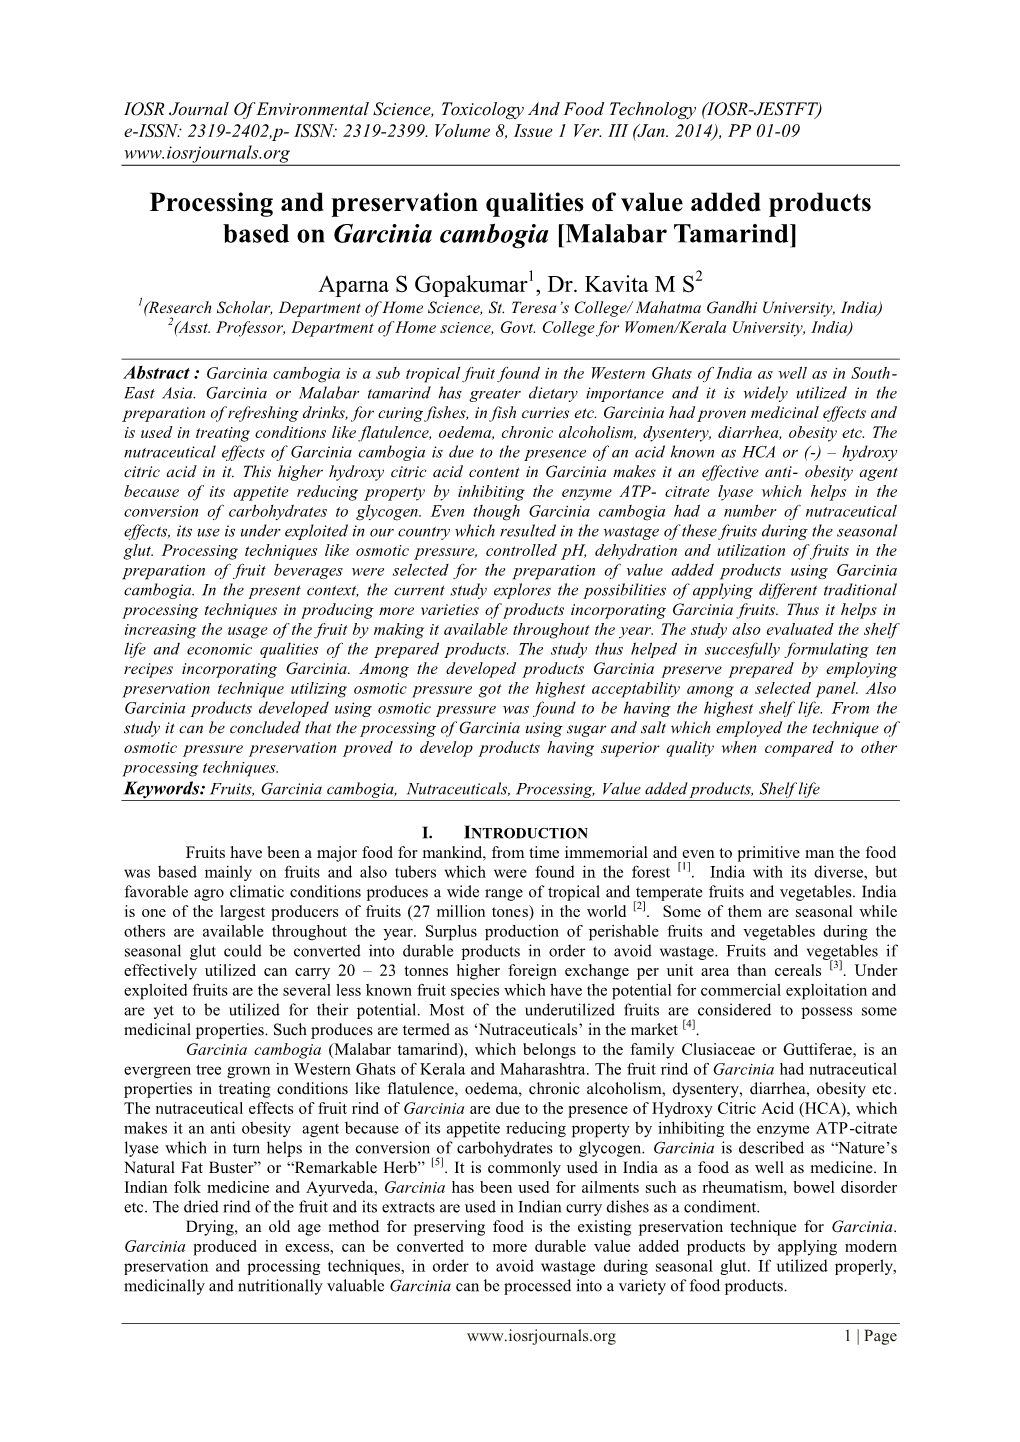 Processing and Preservation Qualities of Value Added Products Based on Garcinia Cambogia [Malabar Tamarind]